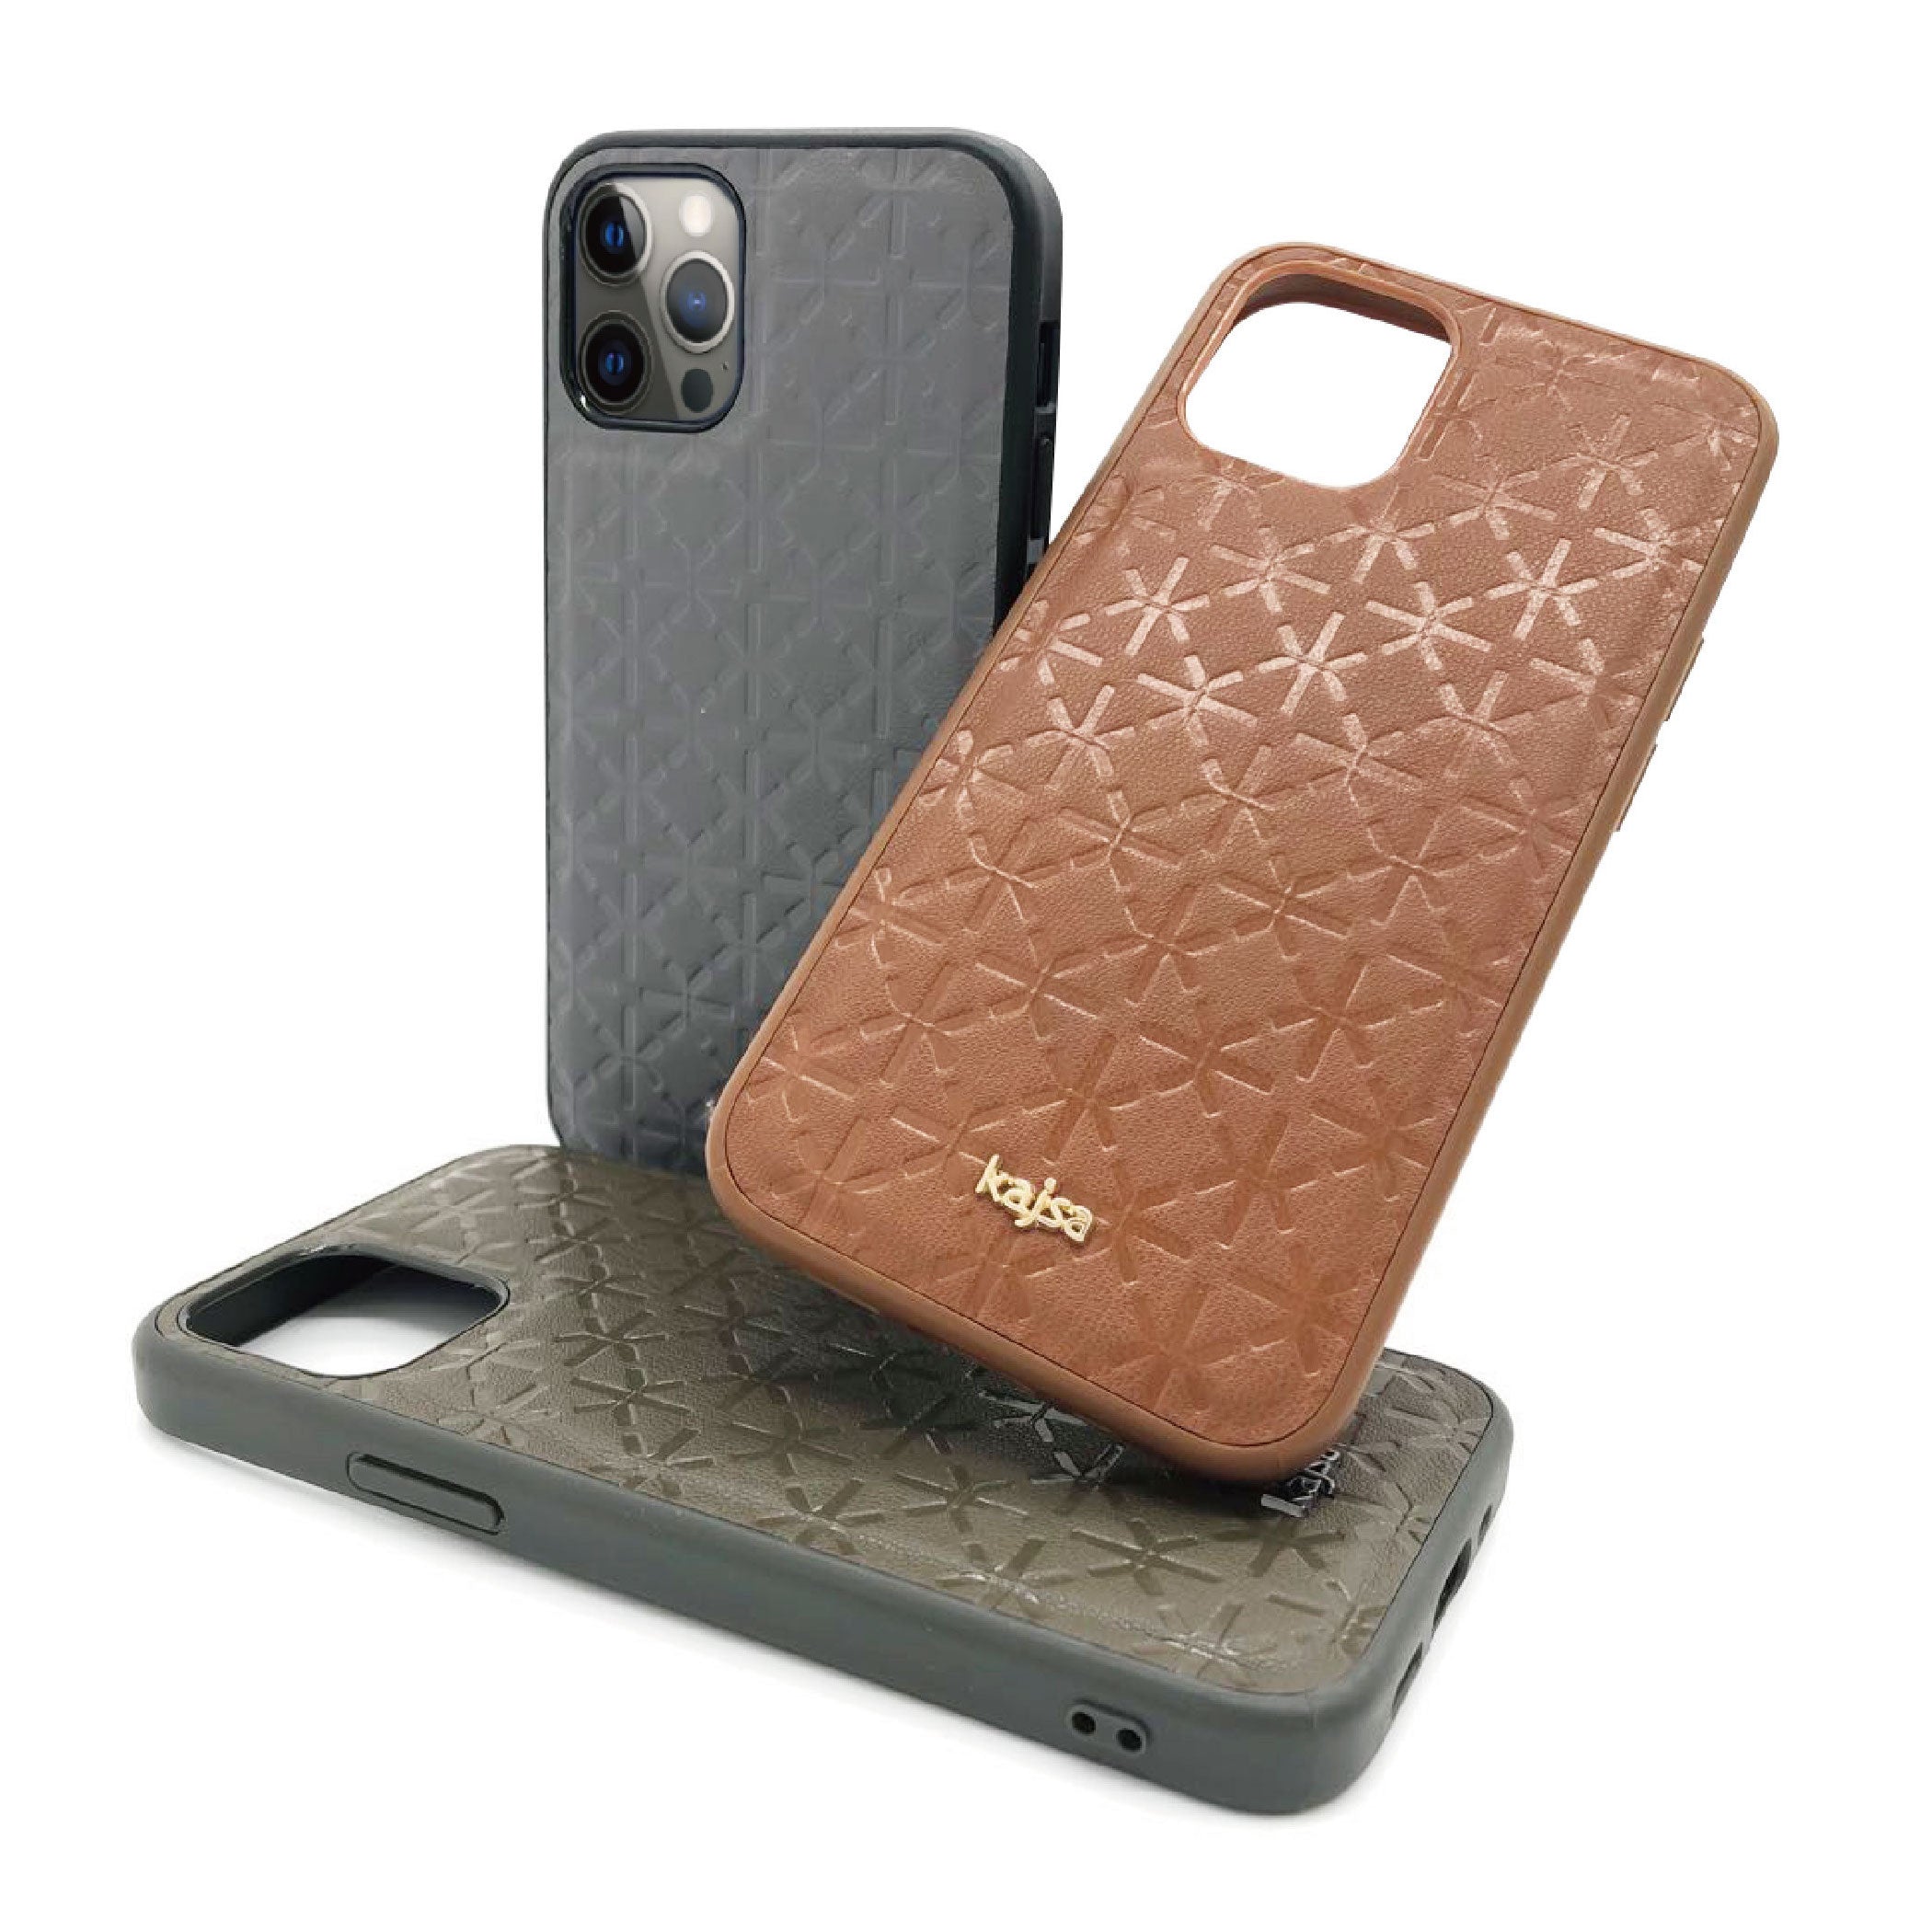 Neo Classic Collection - Mono K Back Case for iPhone 12-Phone Case- phone case - phone cases- phone cover- iphone cover- iphone case- iphone cases- leather case- leather cases- DIYCASE - custom case - leather cover - hand strap case - croco pattern case - snake pattern case - carbon fiber phone case - phone case brand - unique phone case - high quality - phone case brand - protective case - buy phone case hong kong - online buy phone case - iphone‎手機殼 - 客製化手機殼 - samsung ‎手機殼 - 香港手機殼 - 買電話殼